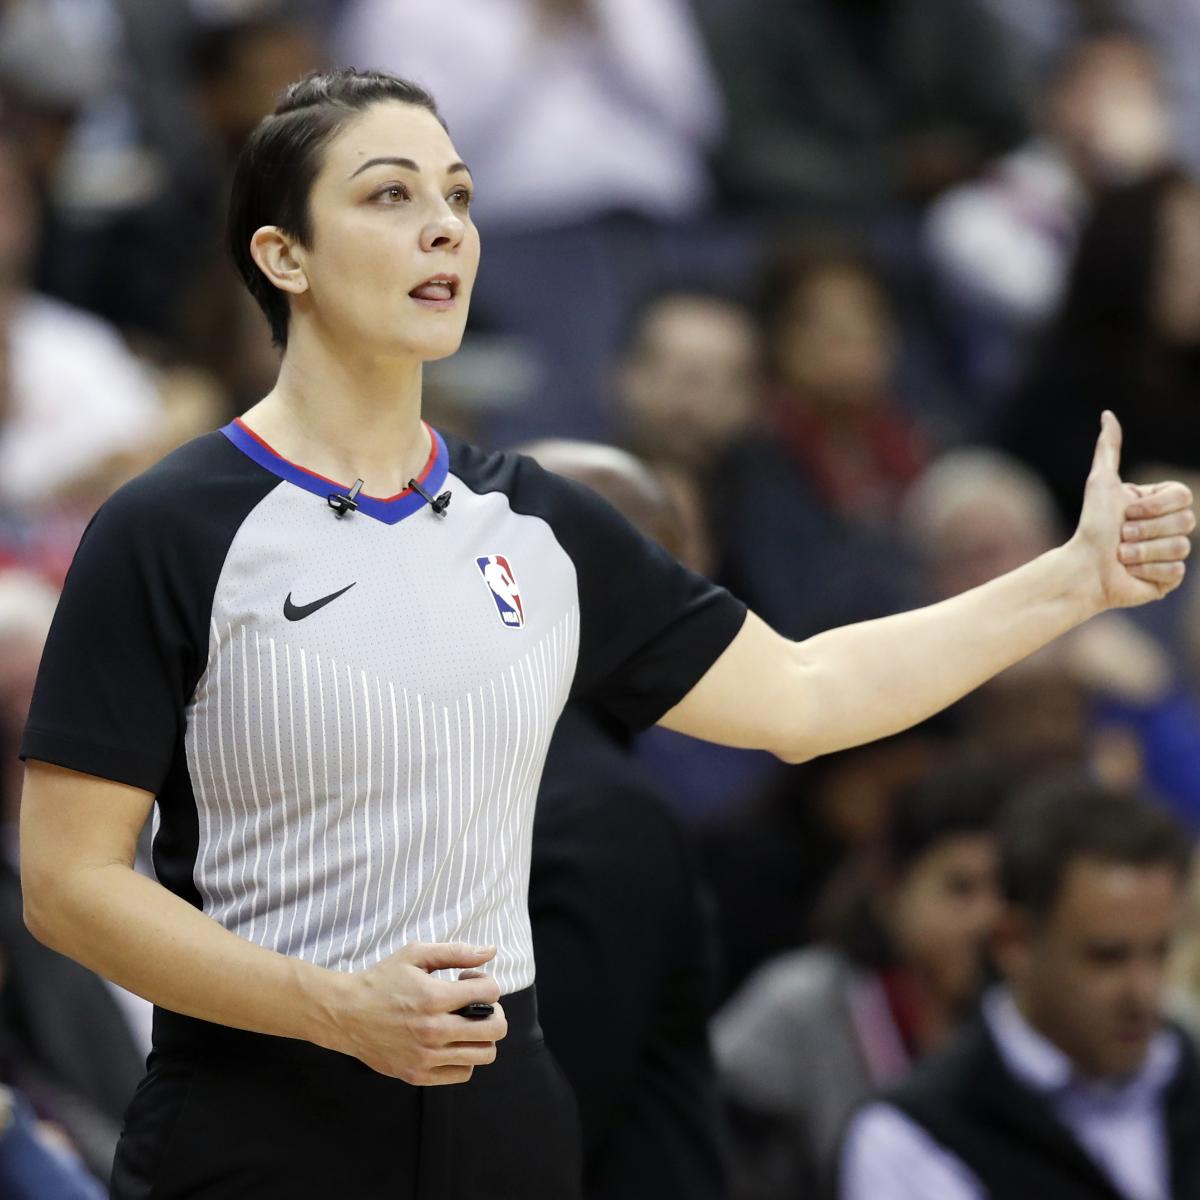 Female referees in the NBA